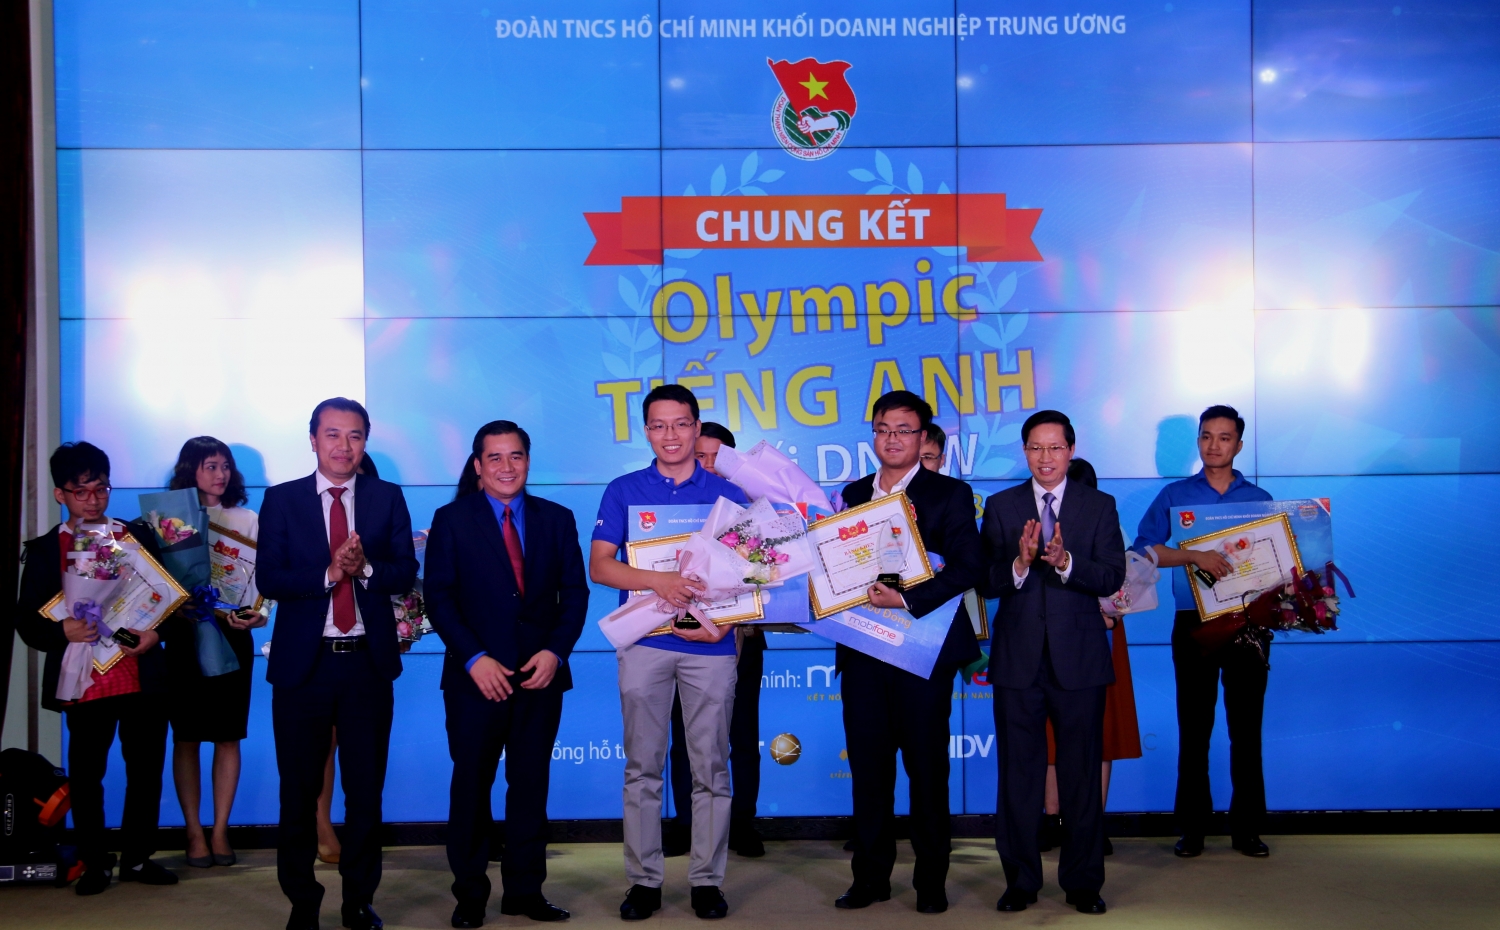 soi noi cuoc thi olympic tieng anh khoi doanh nghiep trung uong nam 2018